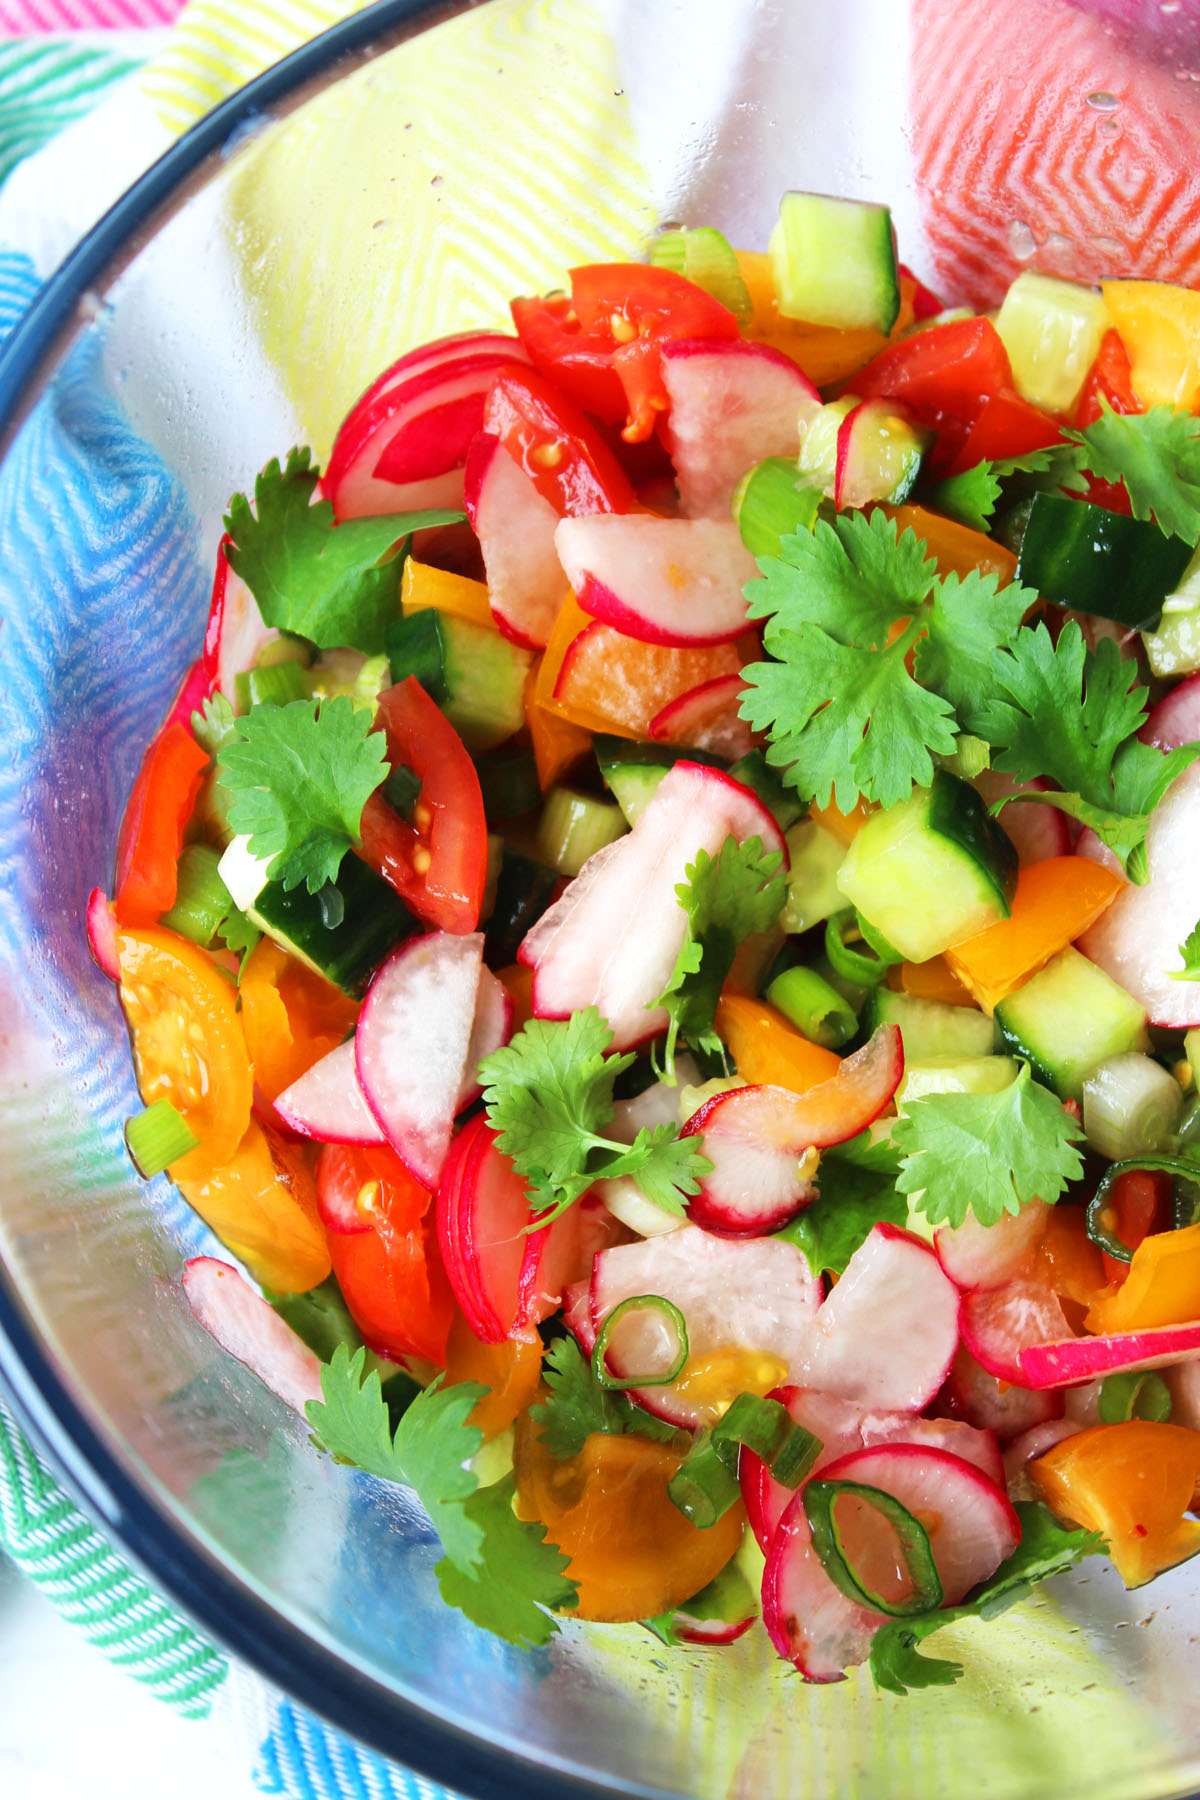 This Radish and Lime Salsa is fun, fiery and full of flavour. It's delicious on tacos, fajittas or nachos! Get this tasty Mexican recipe at Supper in the Suburbs!